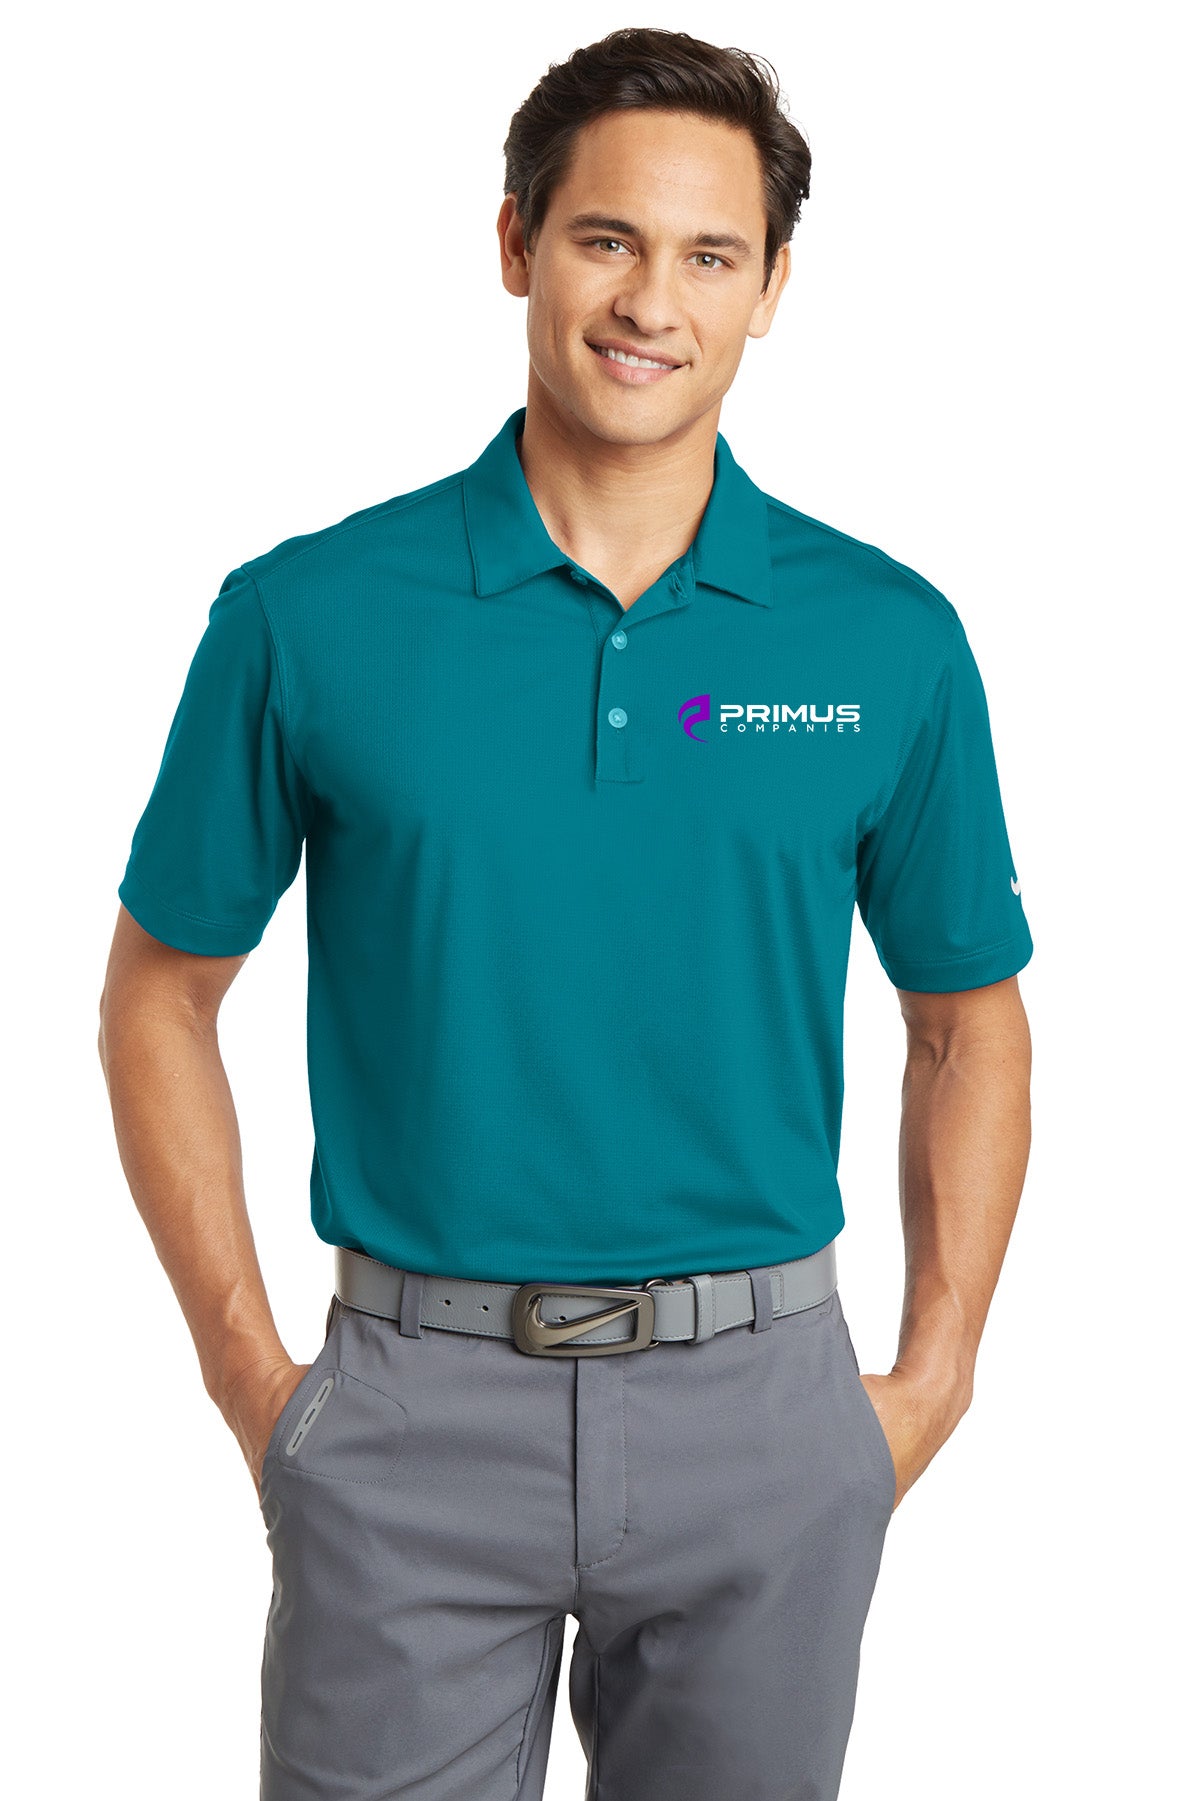 Nike Dri-FIT Vertical Mesh Polo, Product